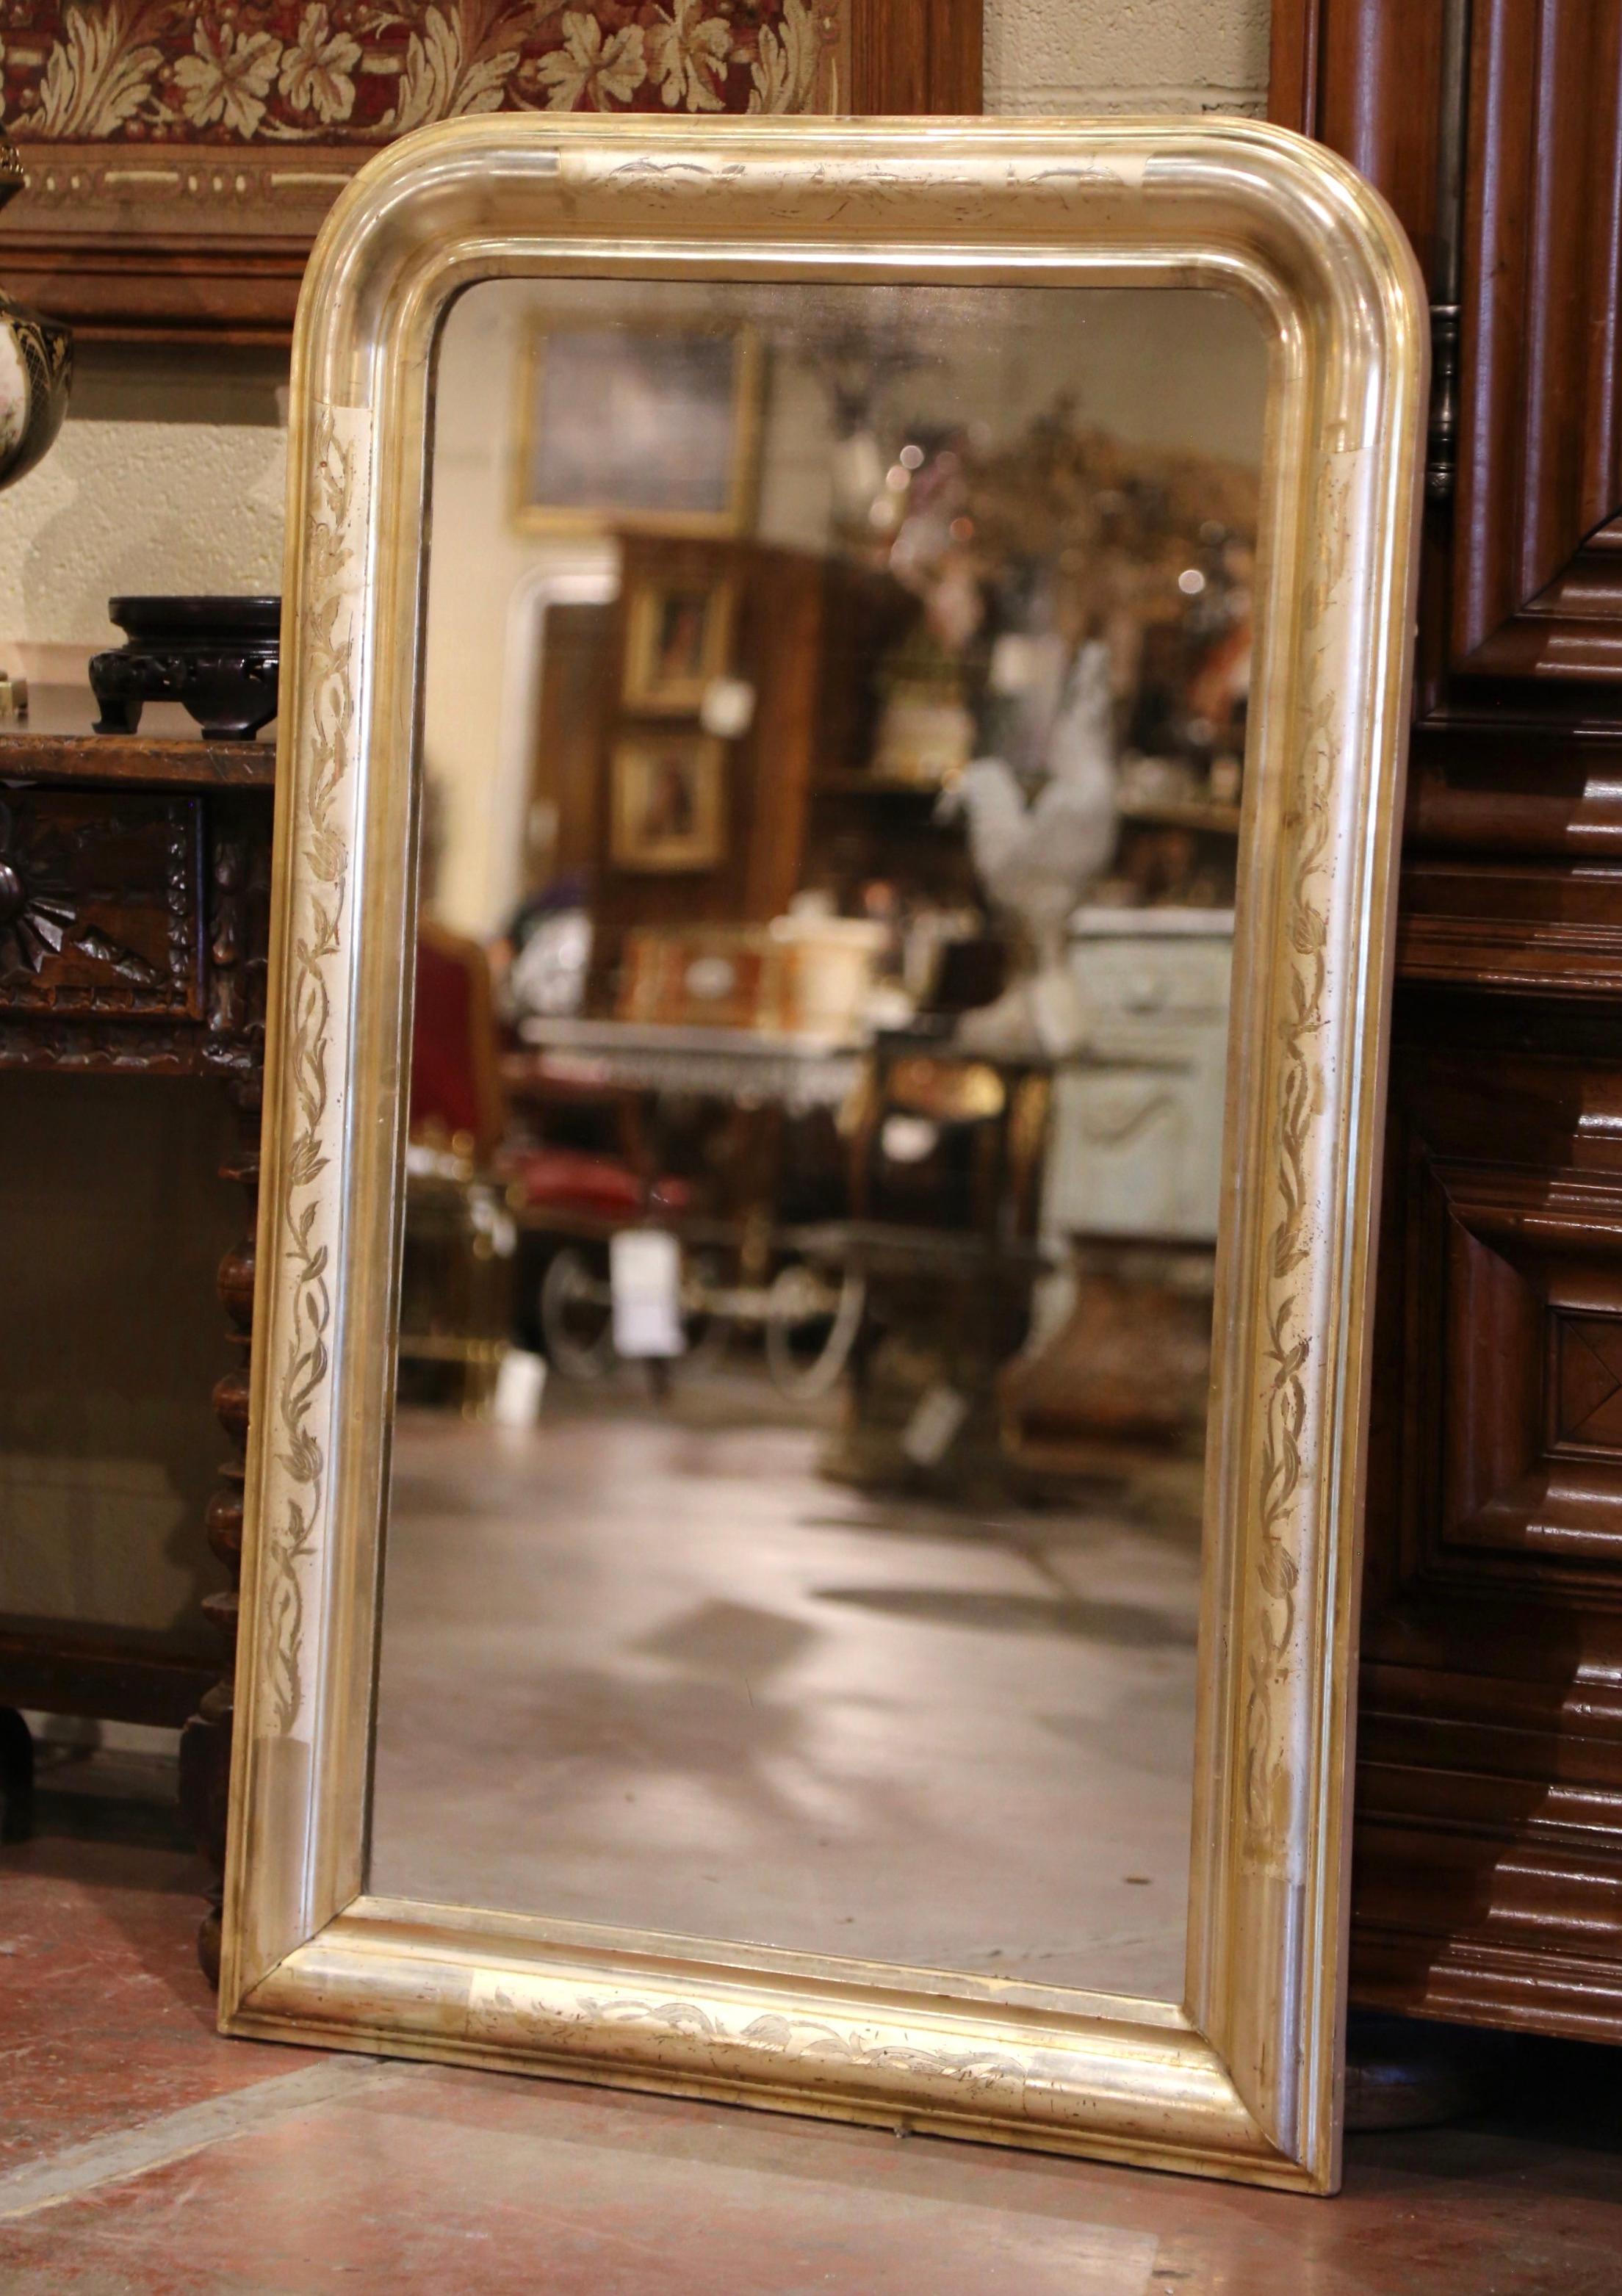 Decorate an entry with this elegant antique gilt mirror. Crafted in the Burgundy region of France, circa 1870, the rectangular mirror has traditional, timeless lines with rounded corners. The frame is decorated with a luxurious gold leaf finish over